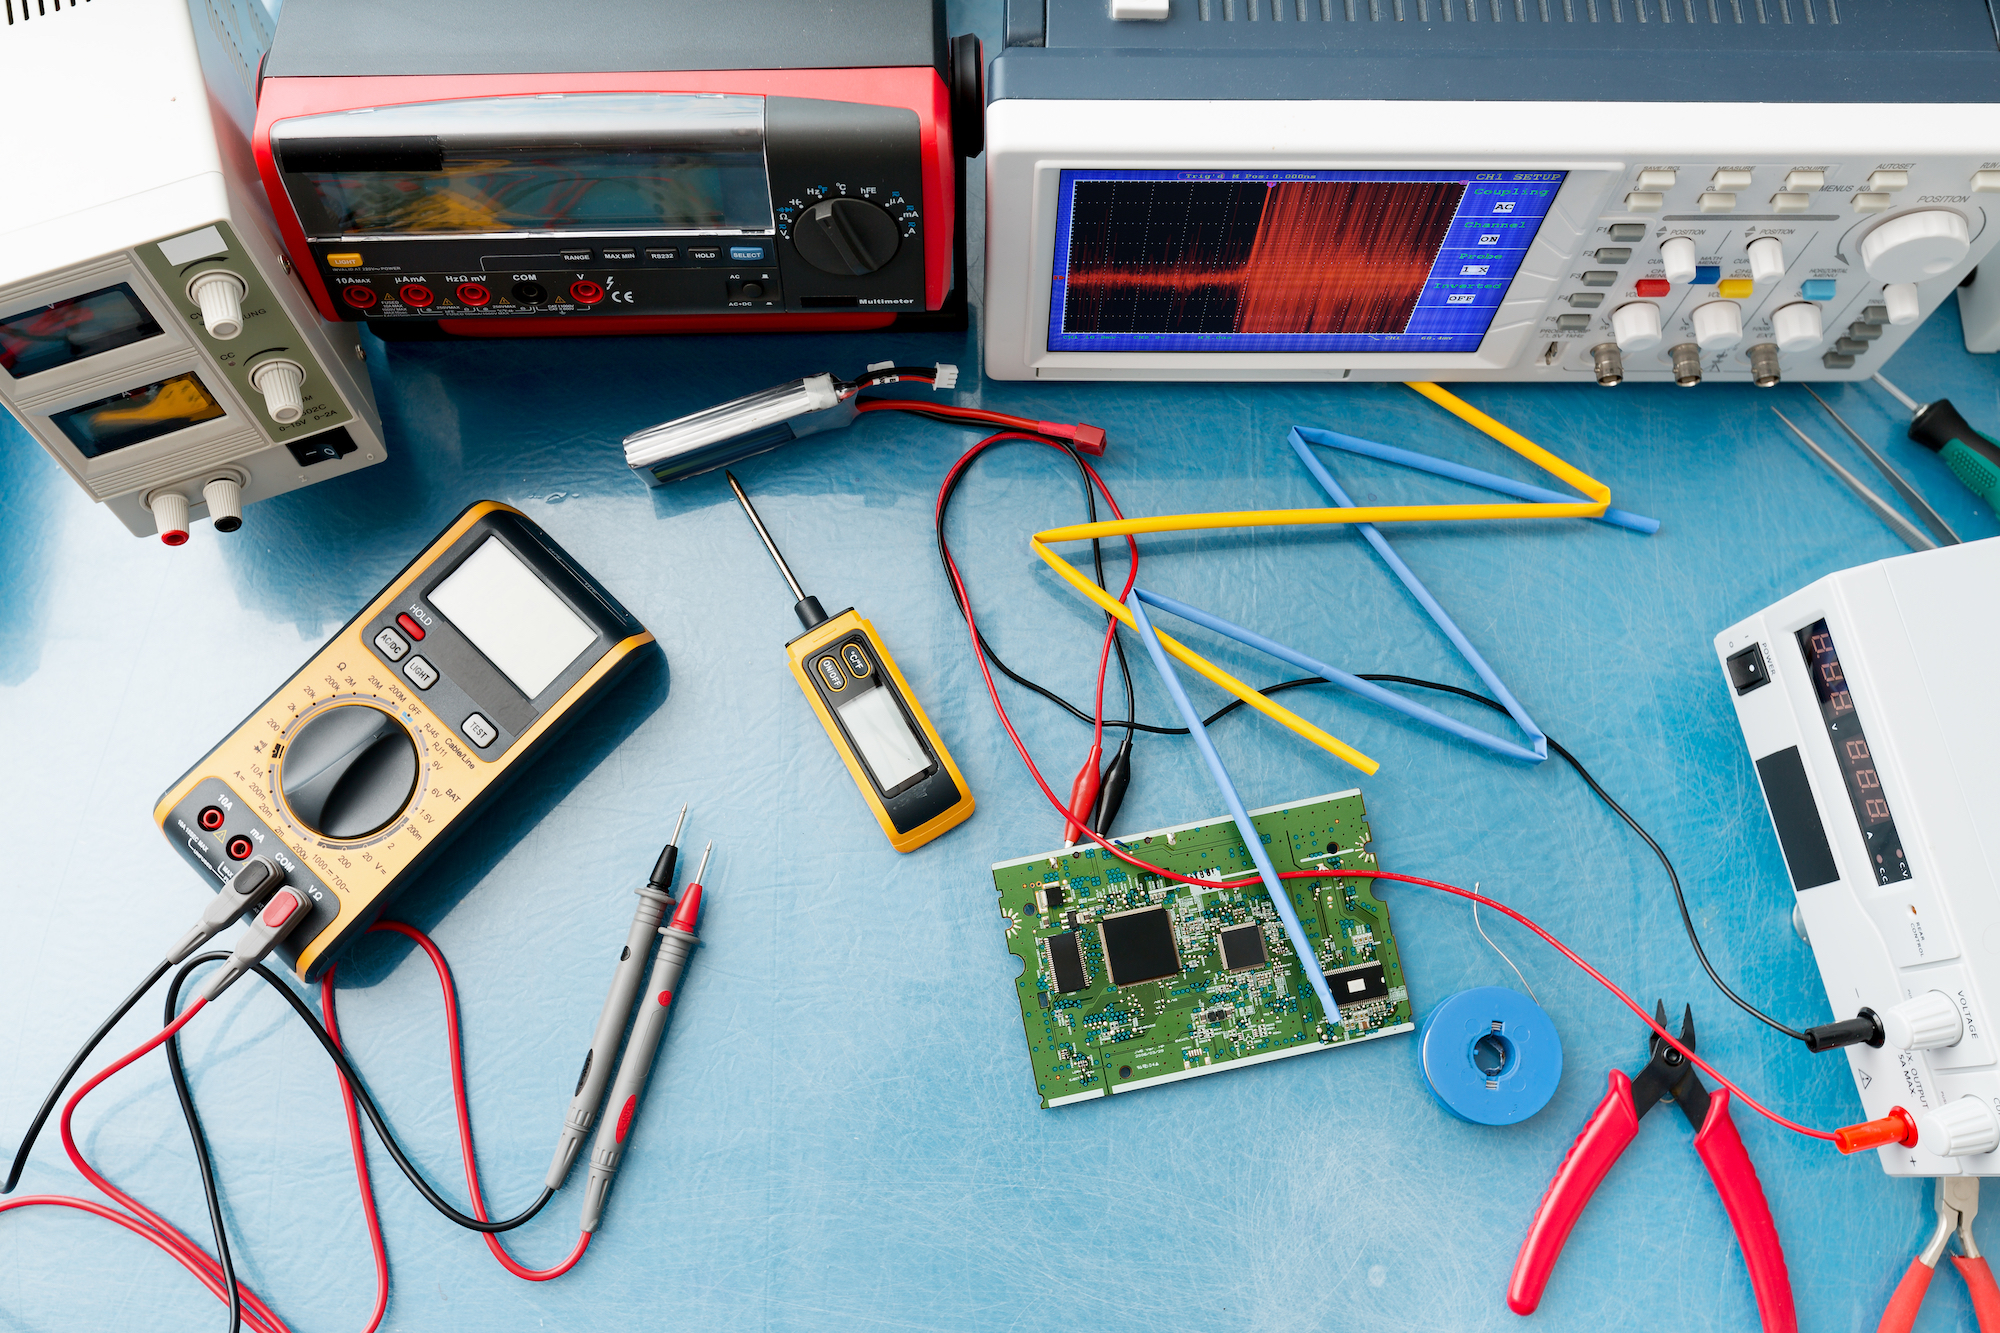 Electrical Calibration Equipment Market Report 2021 | Latest Emerging Technology, Future Business Strategy, Manufacturers Study Forecast to 2031